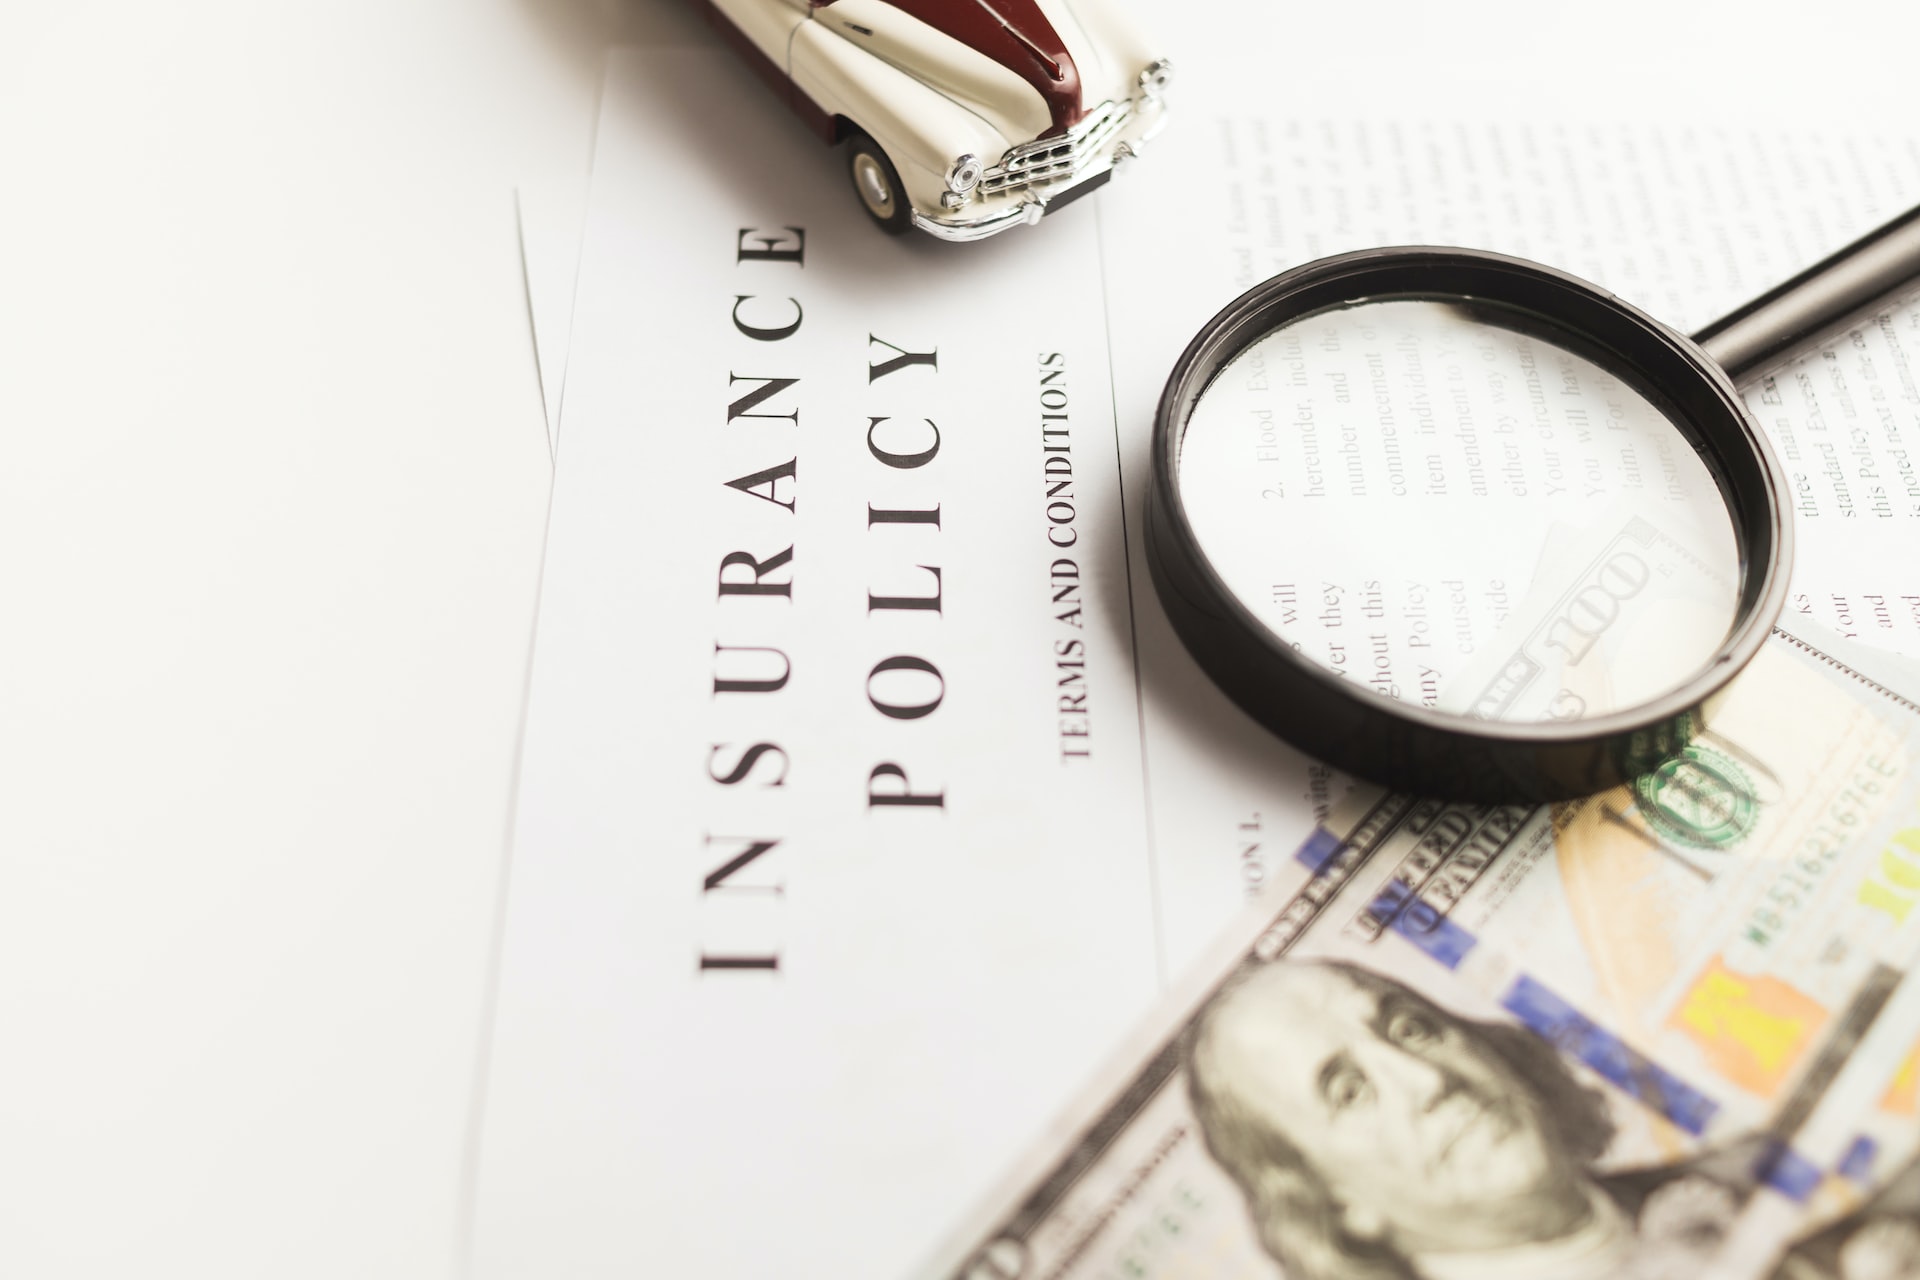 An eCommerce insurance policy with money, a magnifying glass, and a toy car on it.